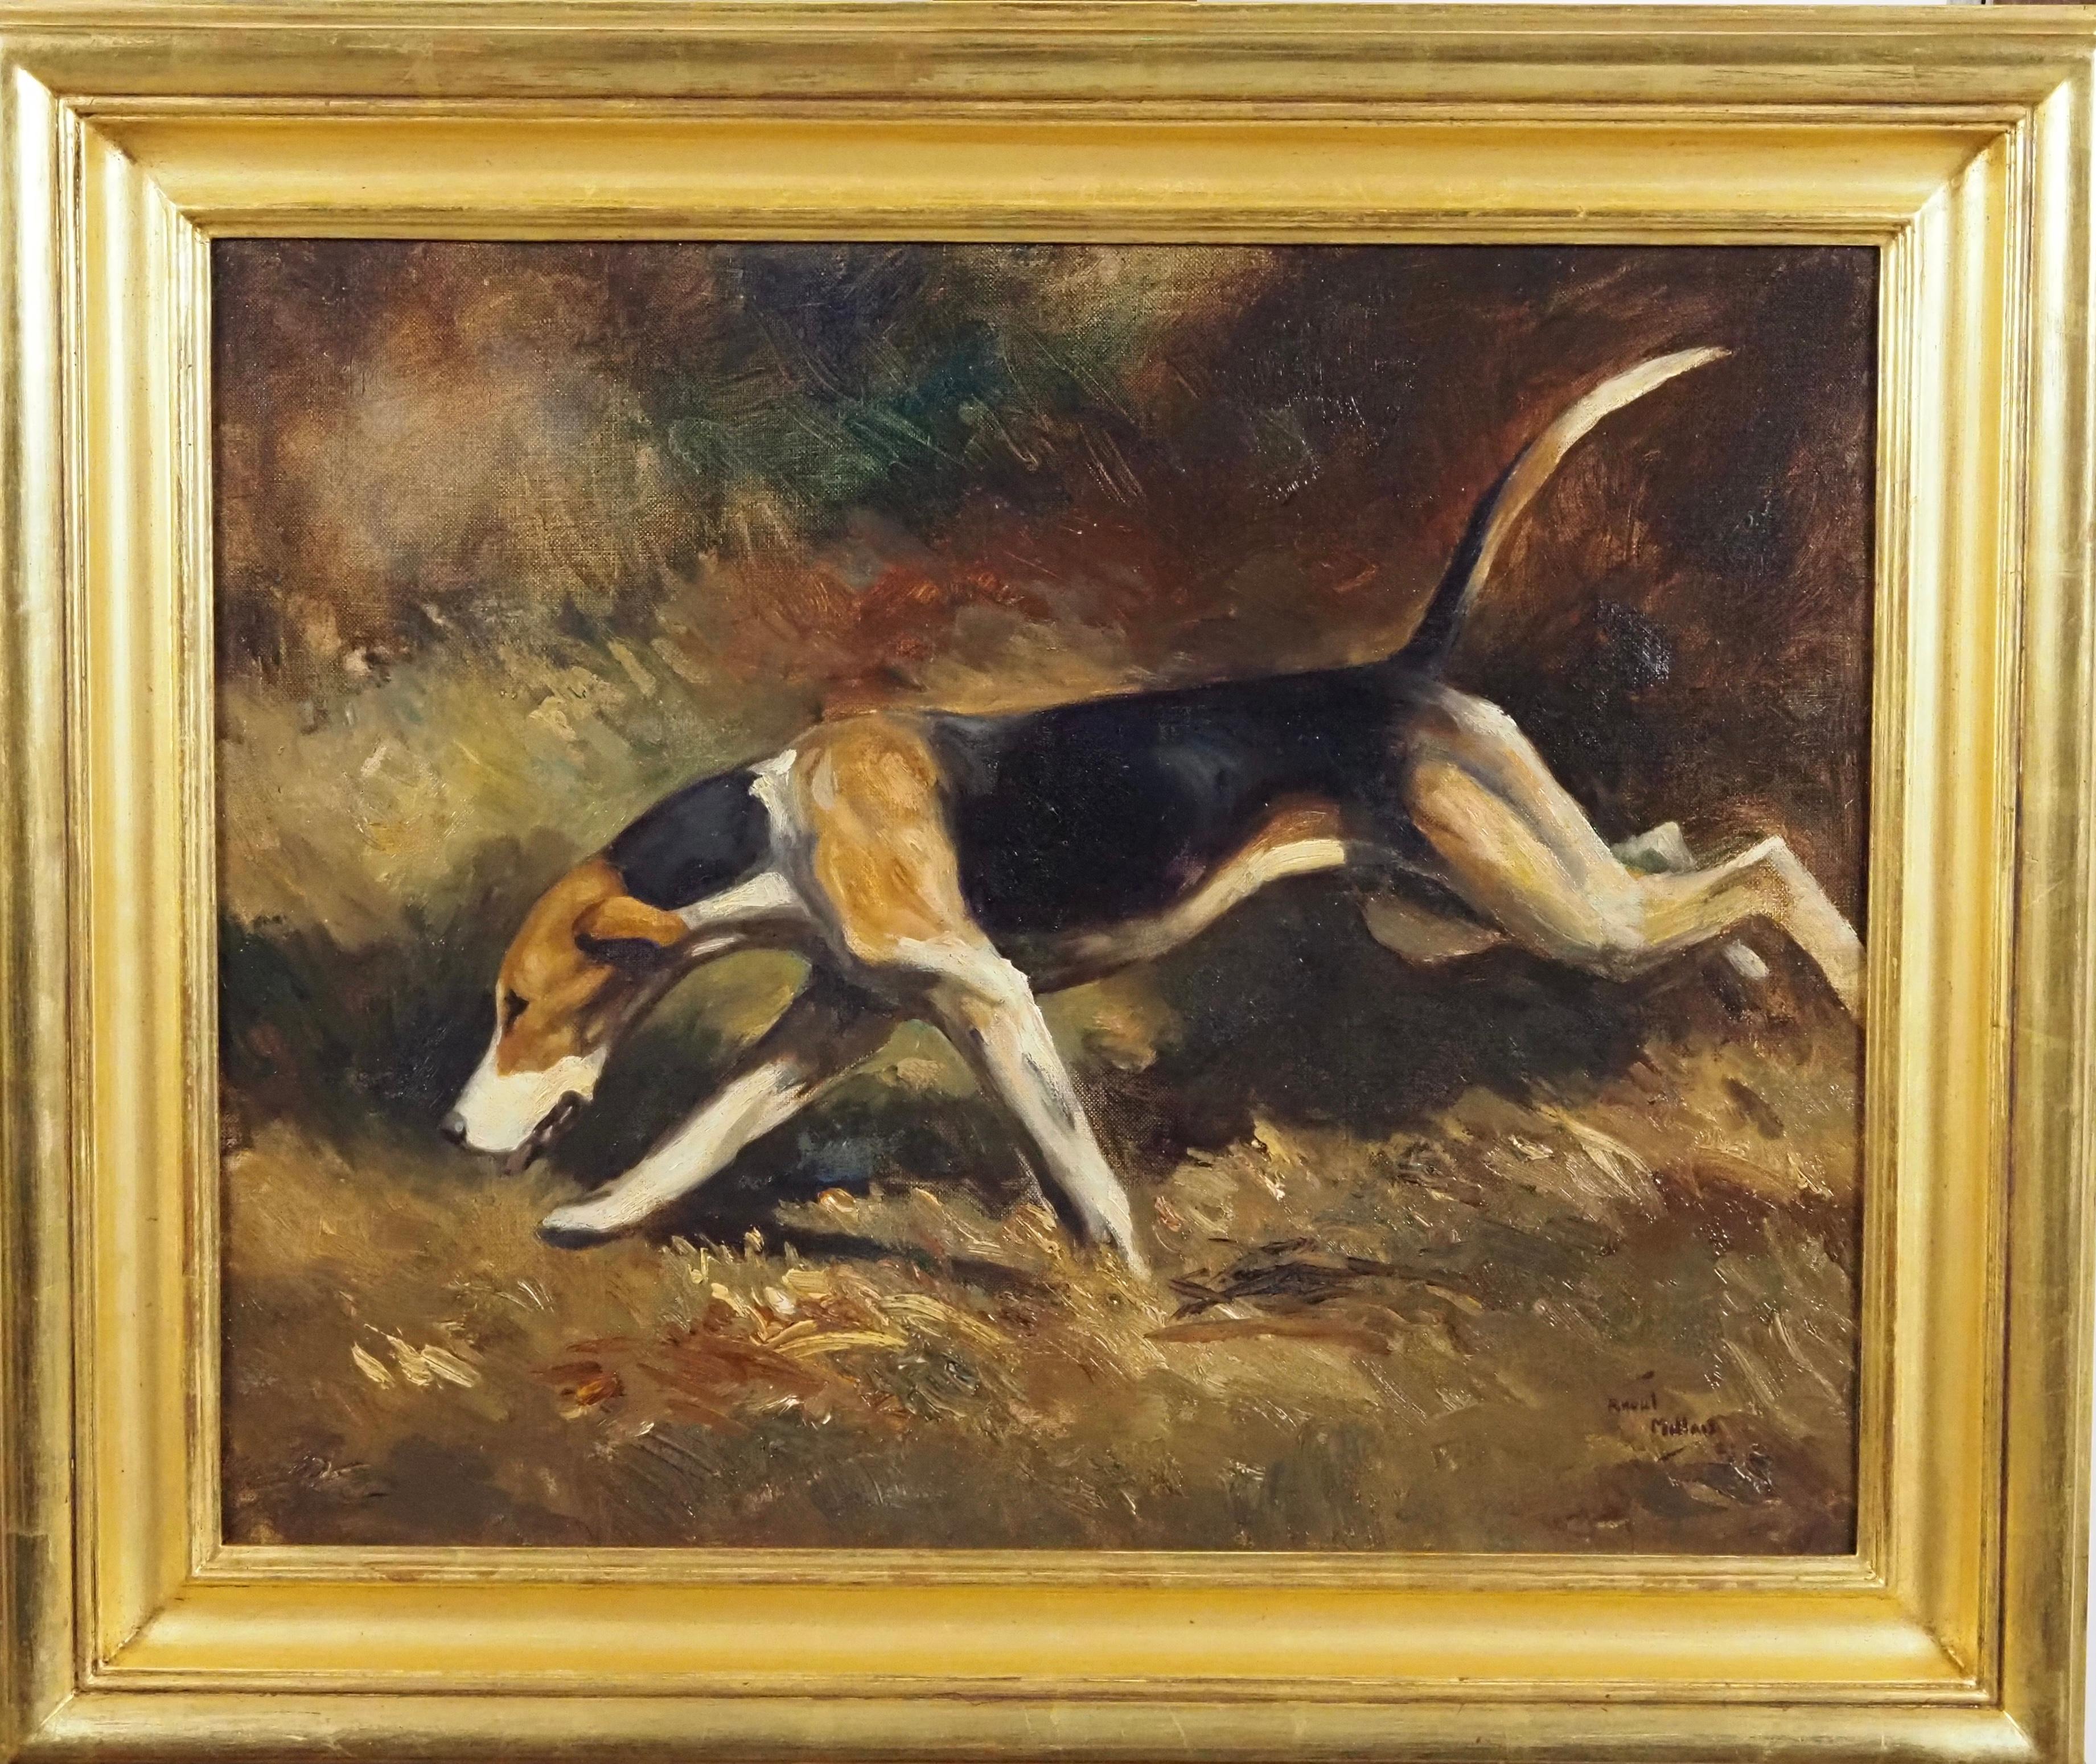 Raoul Millais Animal Painting - A Hound running in a landscape